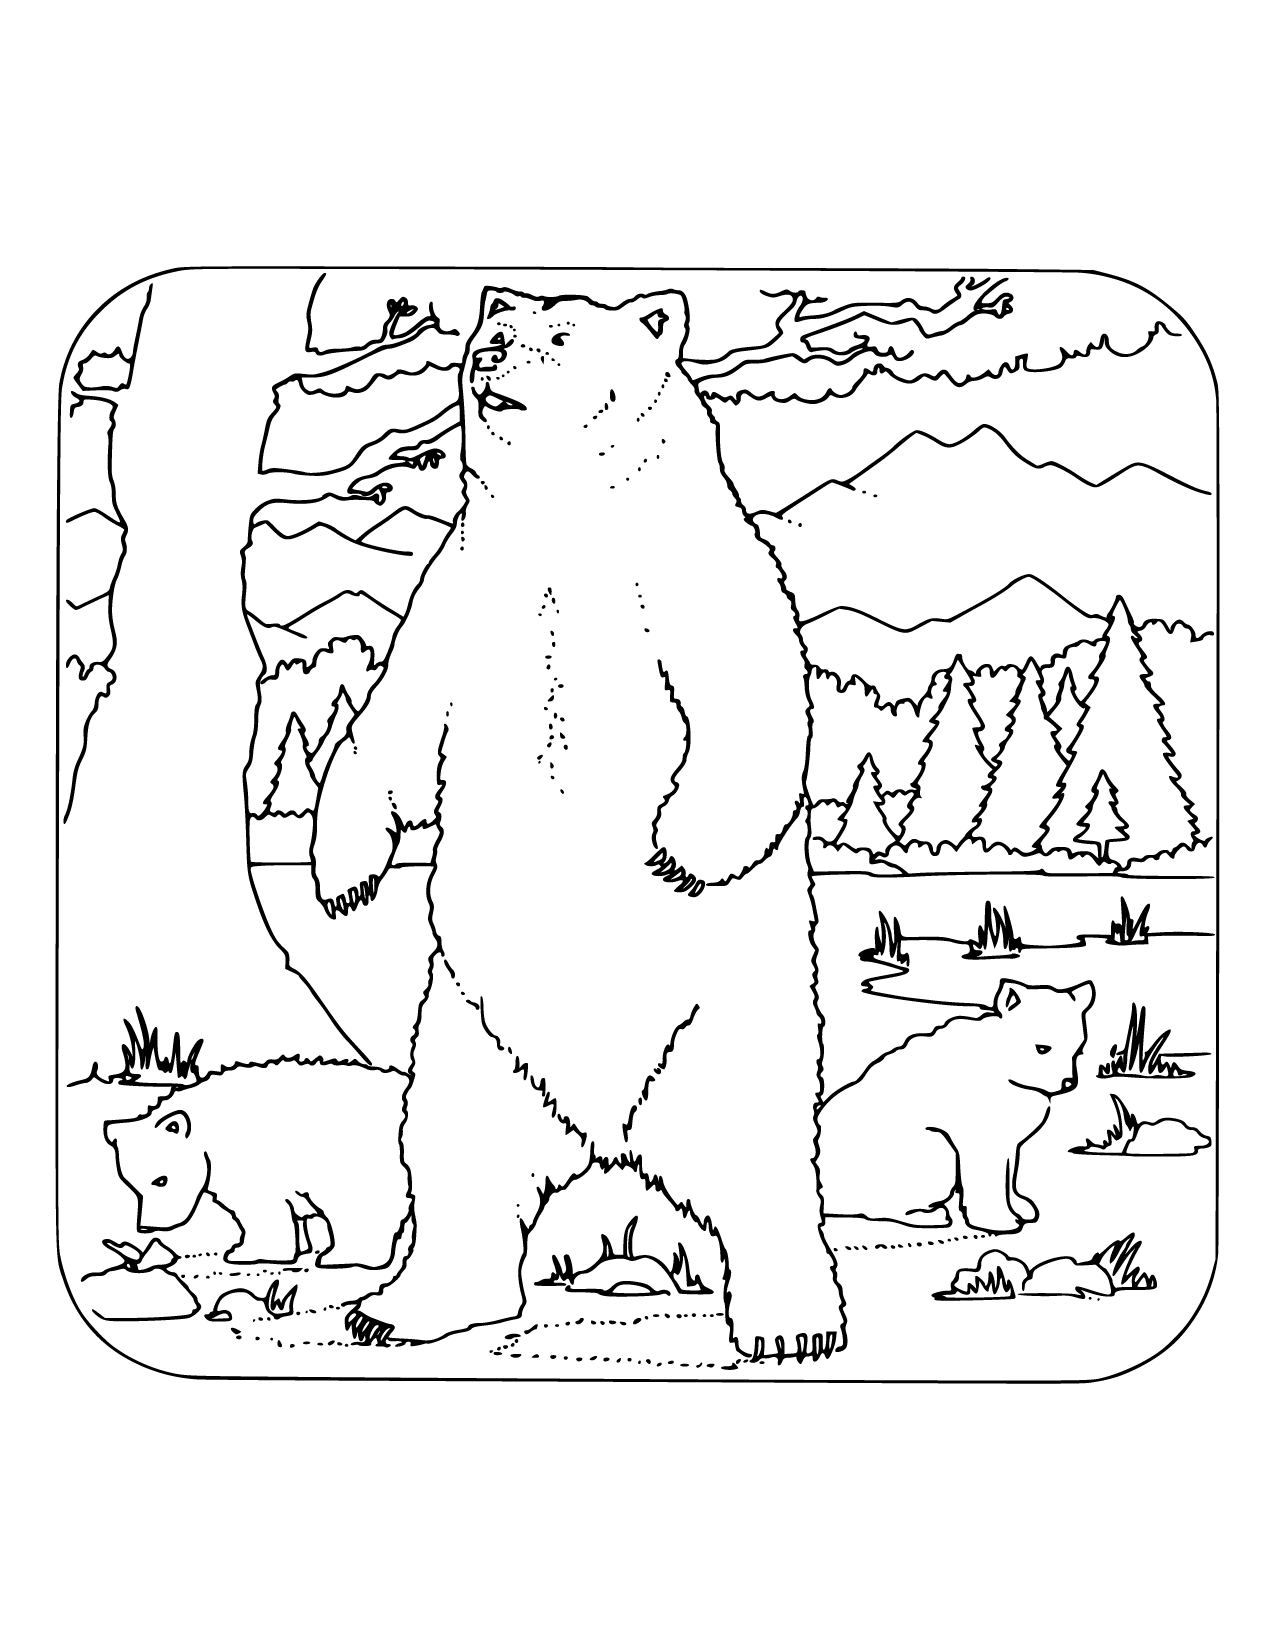 Bear Family In The Wild Coloring Page